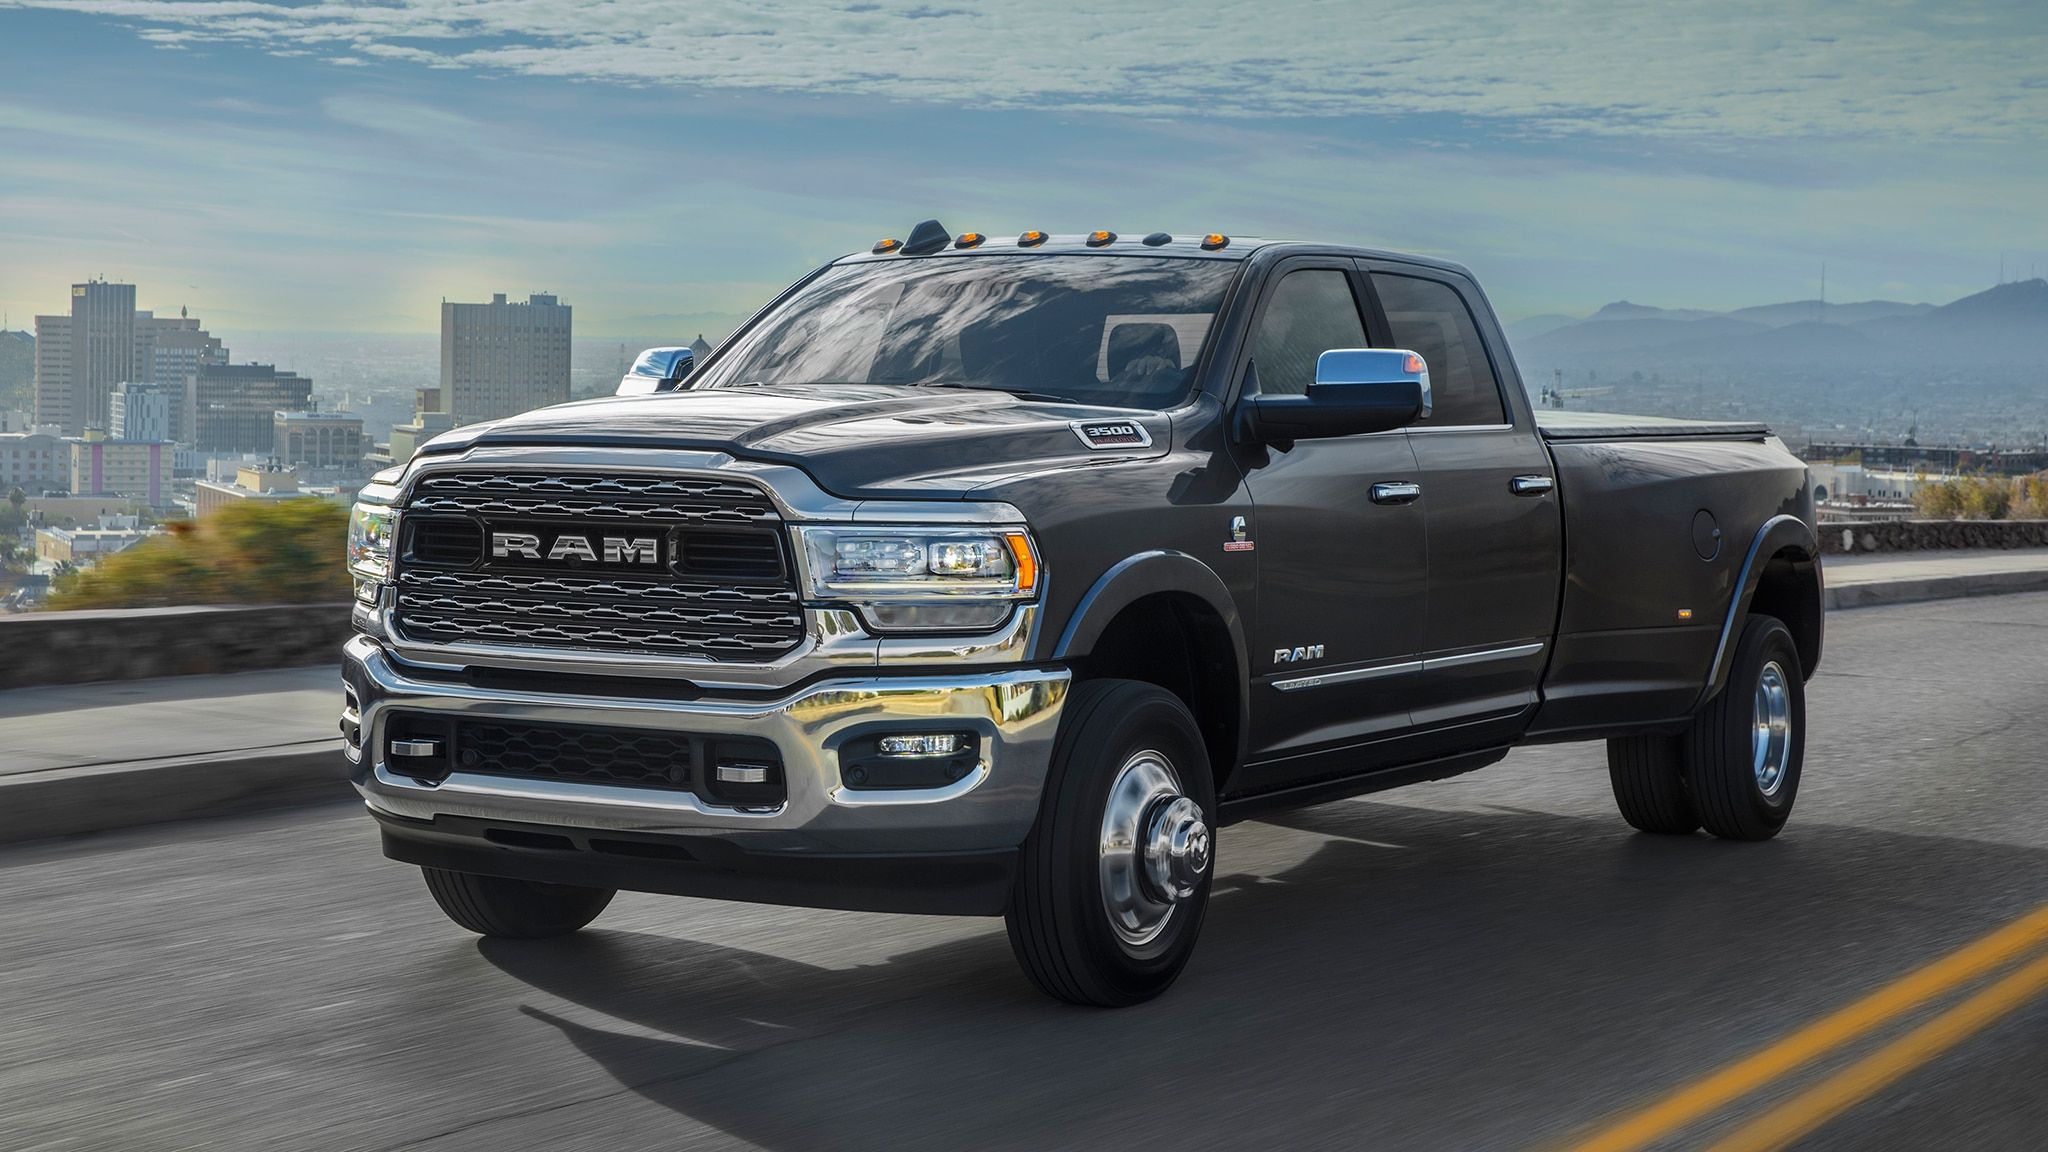 Ram HD First Test: How 000 LB FT Performs At The Track